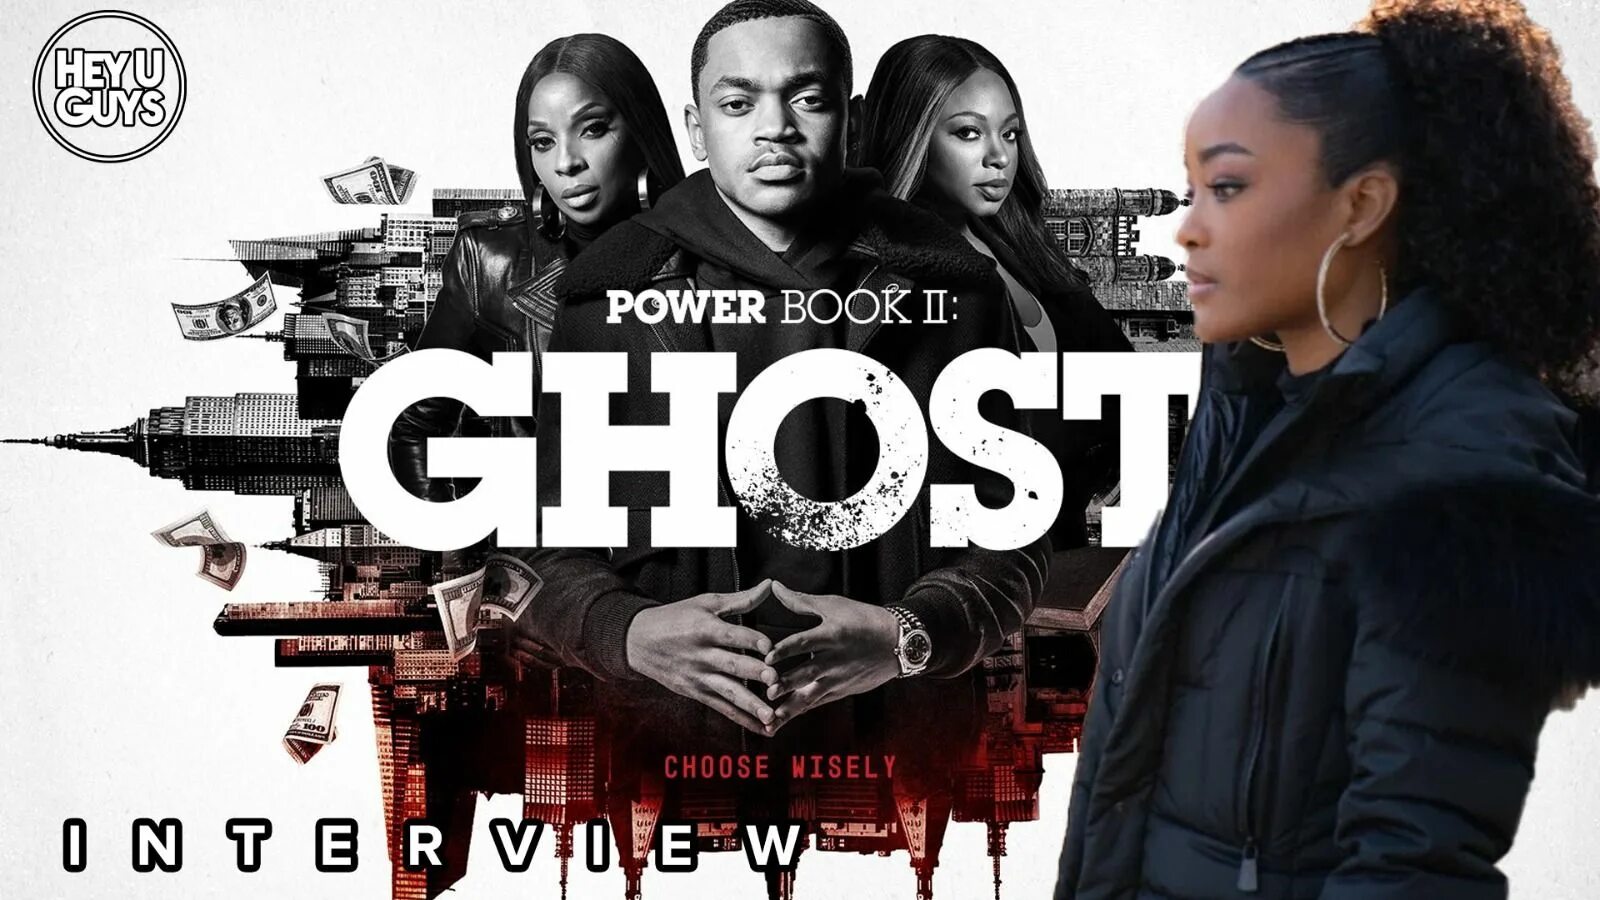 Latoya Tonodeo. Power Ghost serie. Ghosted actress. Power book 2